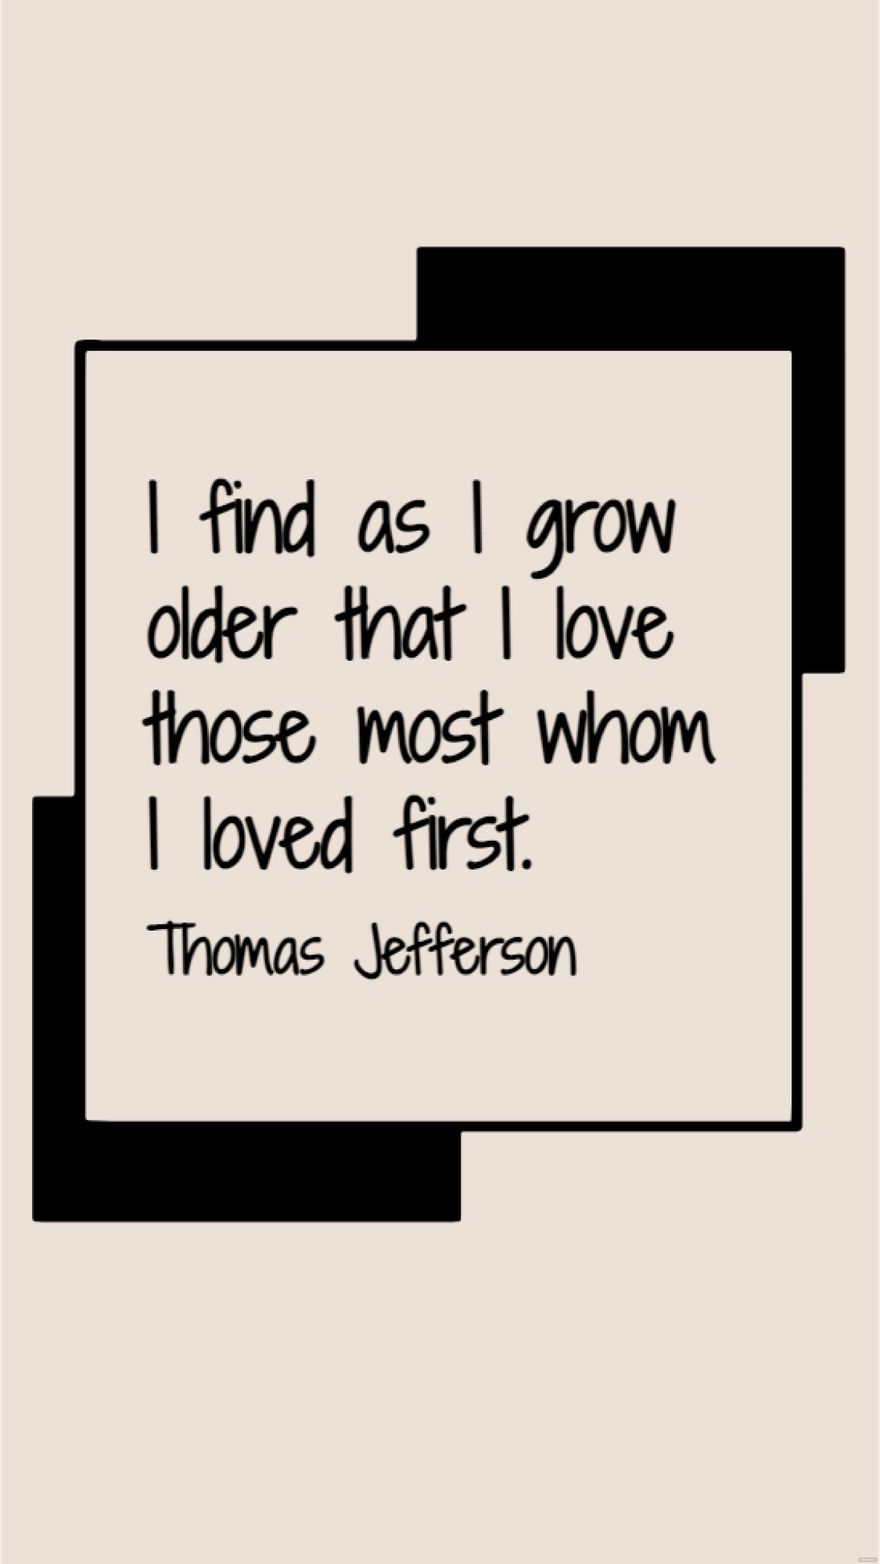 Free Thomas Jefferson - I find as I grow older that I love those most whom I loved first. in JPG